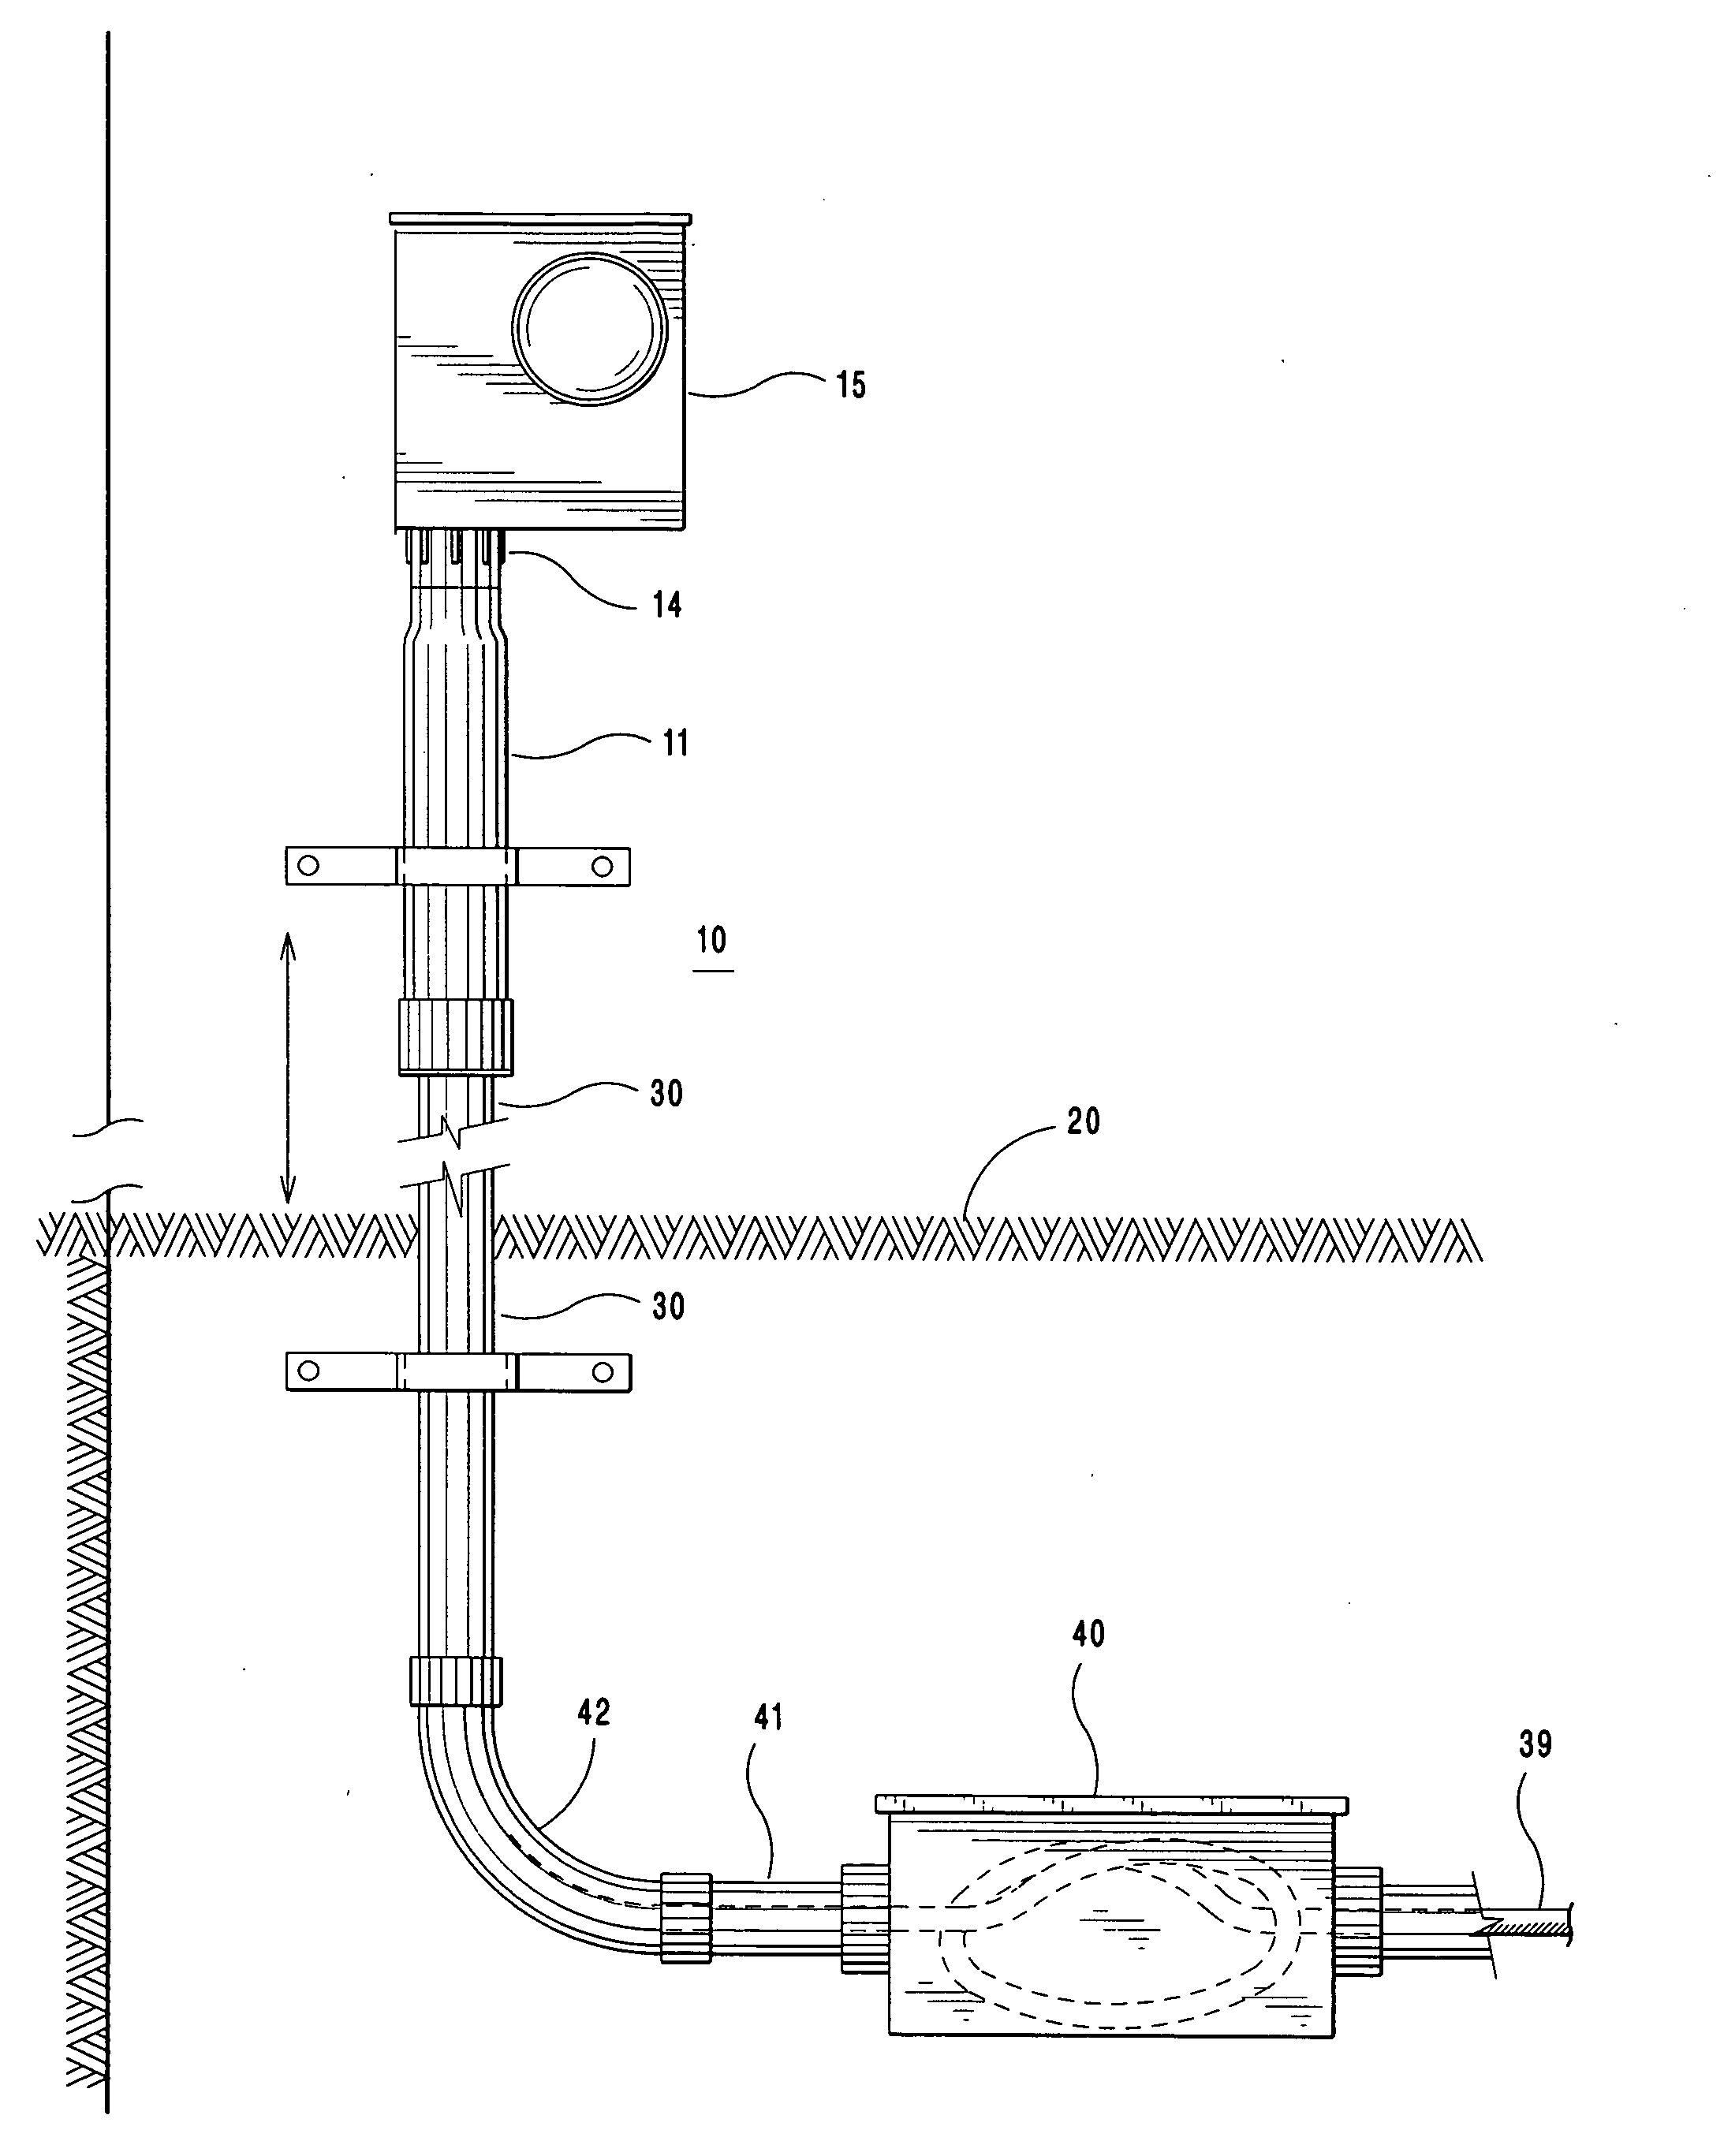 Slack cable arrangement for underground electric service conduit connected to service boxes on the sides of buildings